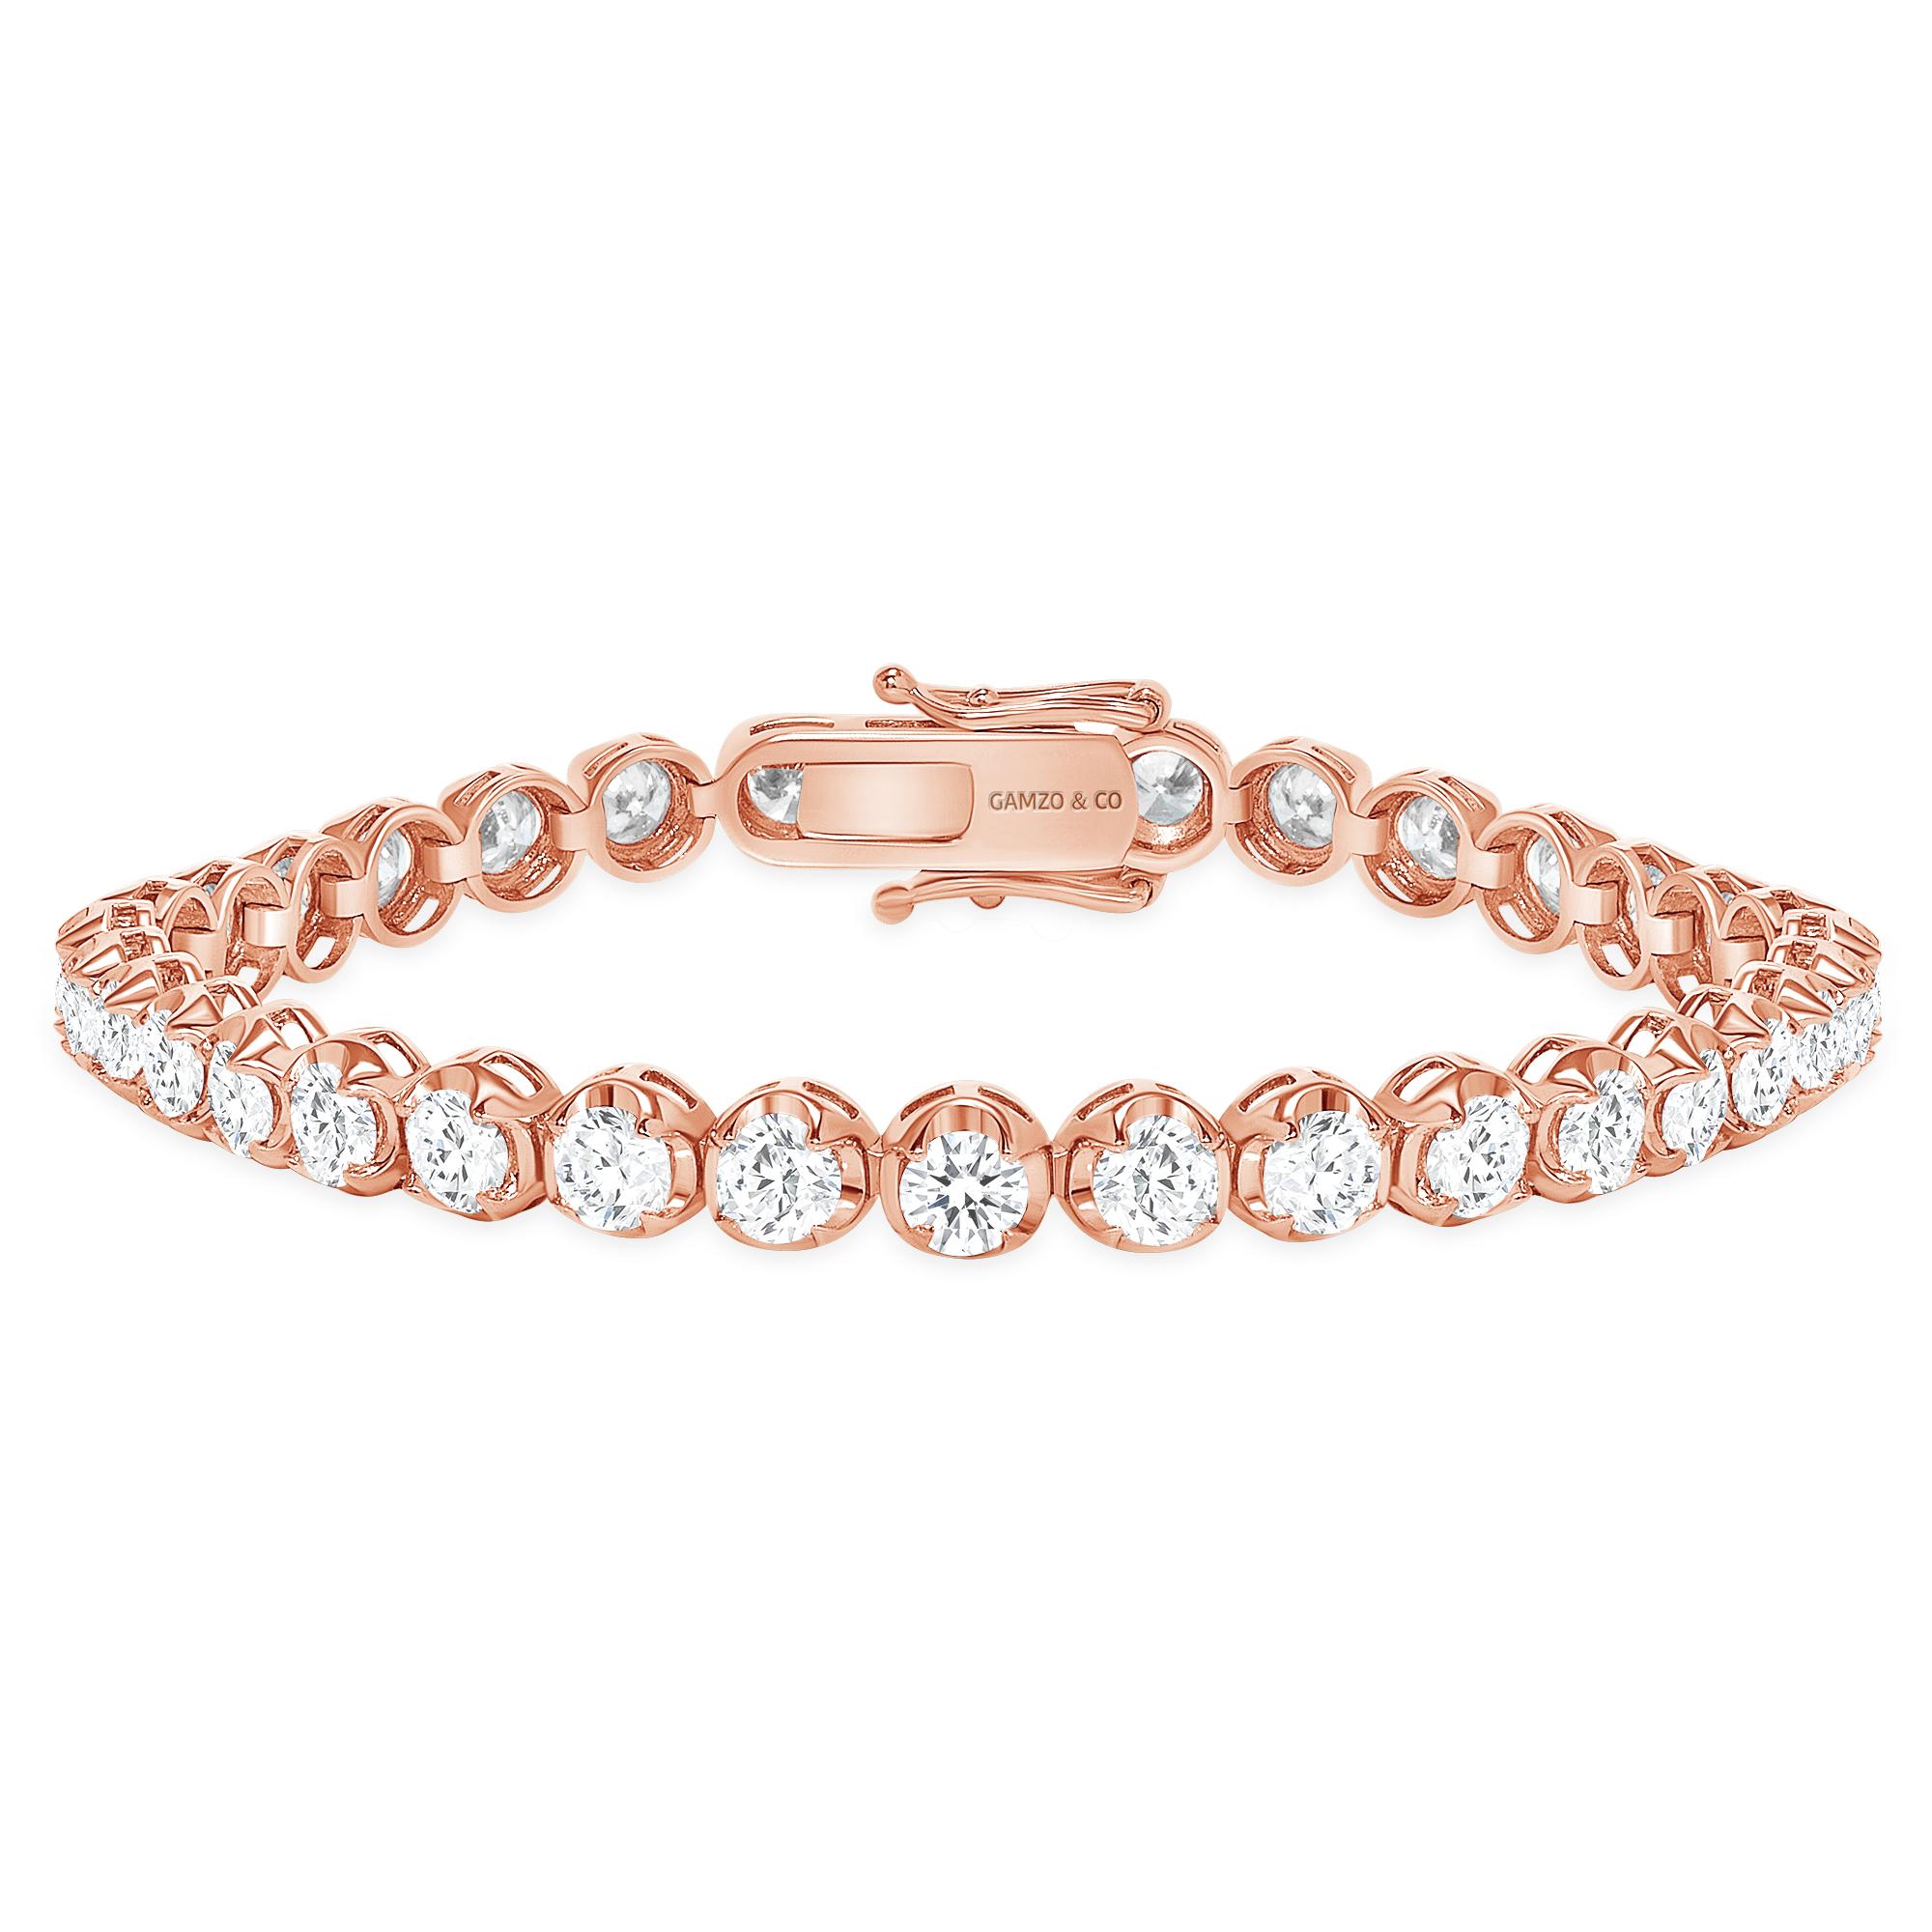 These beautiful round diamonds dance around your wrist as they absorb light and attention.
Metal: 14k Gold
Diamond Cut: Round
Diamond Total Carats: 5ct
Diamond Clarity: VS
Diamond Color: F
Color: Rose Gold
Bracelet Length: 7 Inches 
Included with